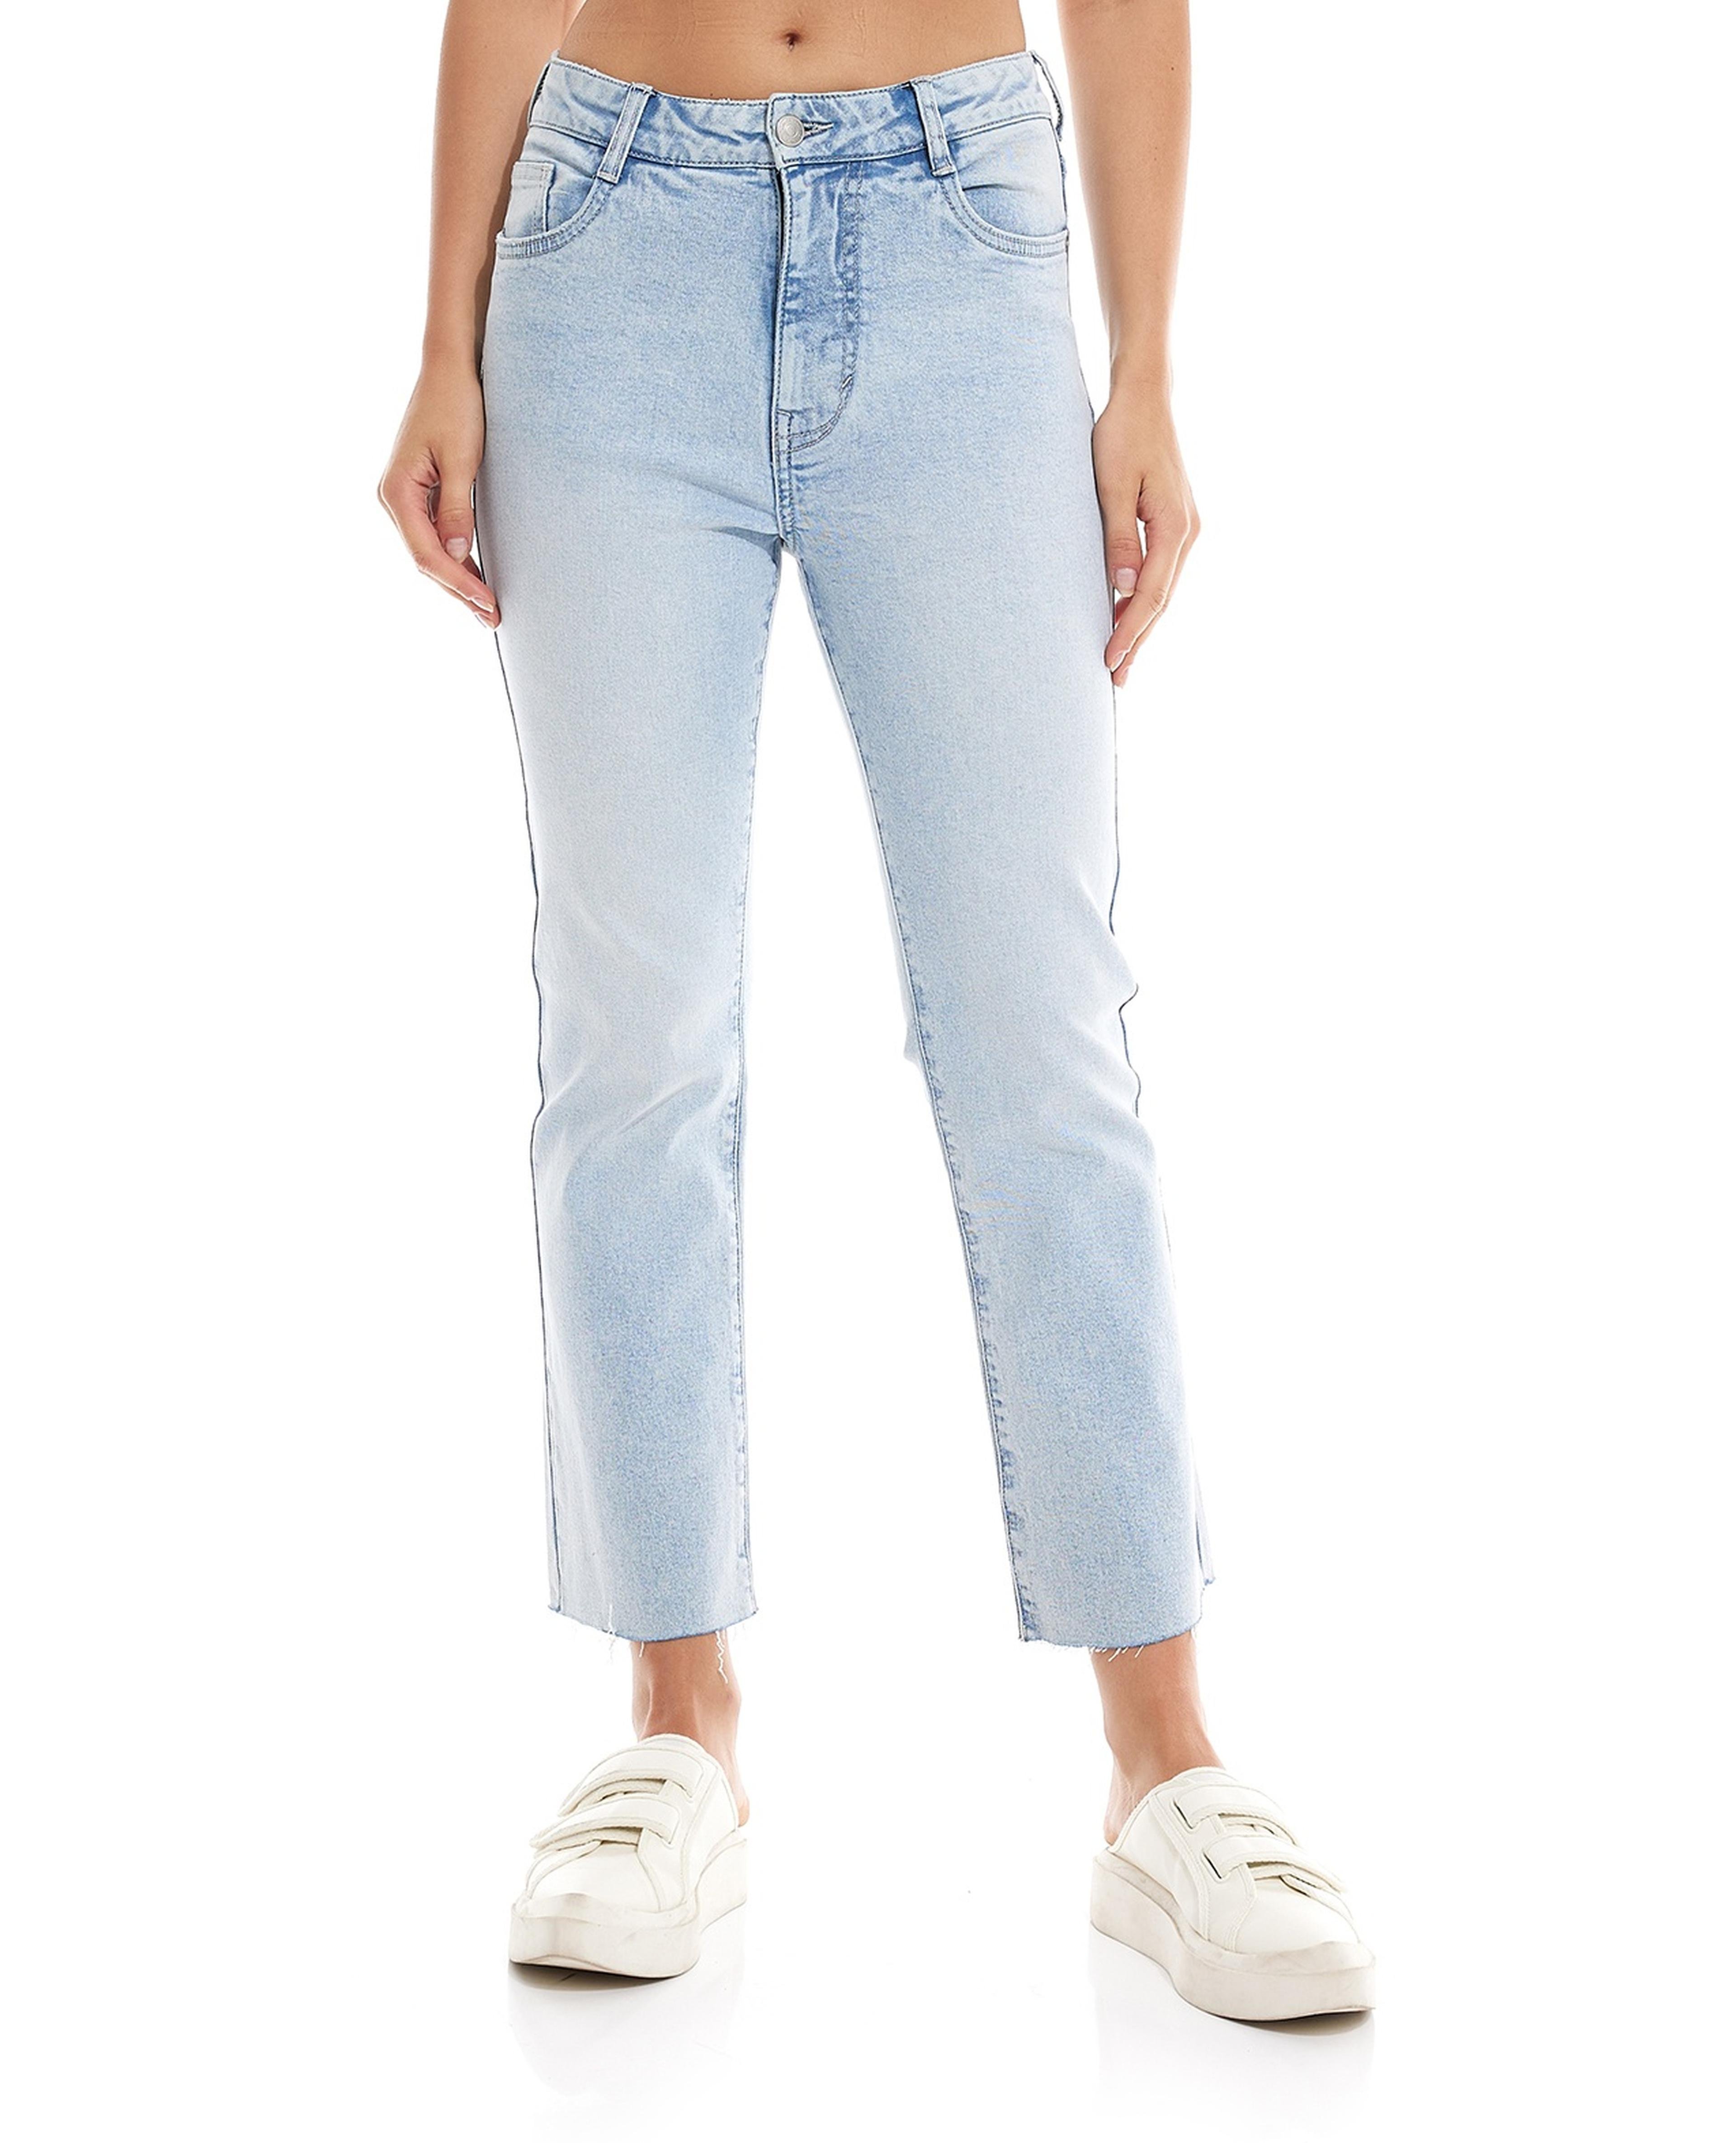 Buy Women Jeans Online at best prices